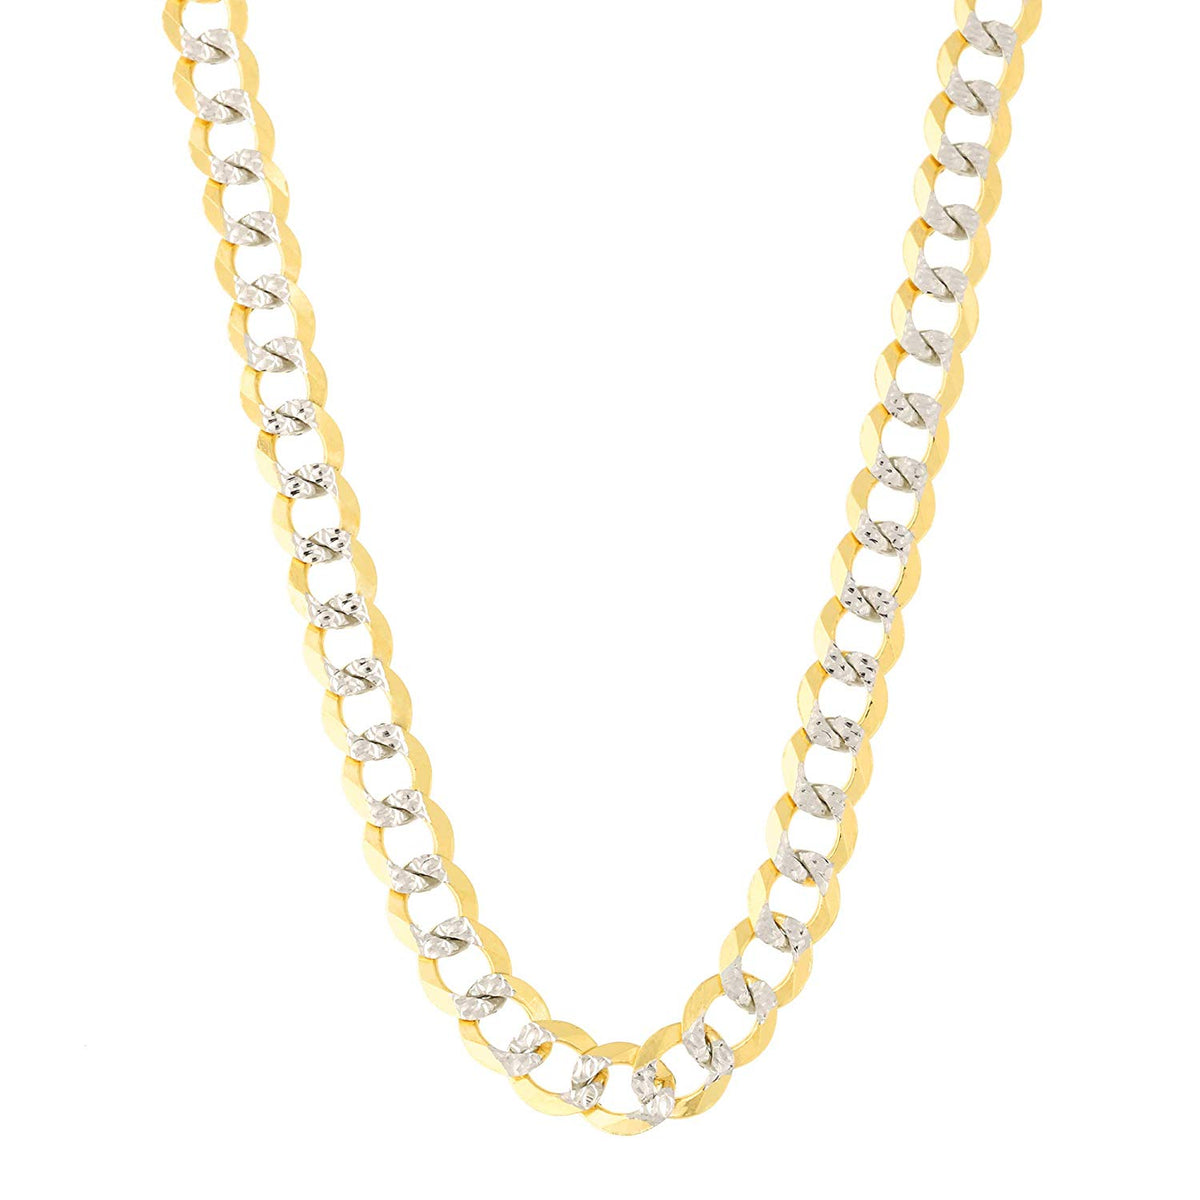 14k 2 Tone Yellow And White Gold Curb Chain Necklace, 4.7mm fine designer jewelry for men and women